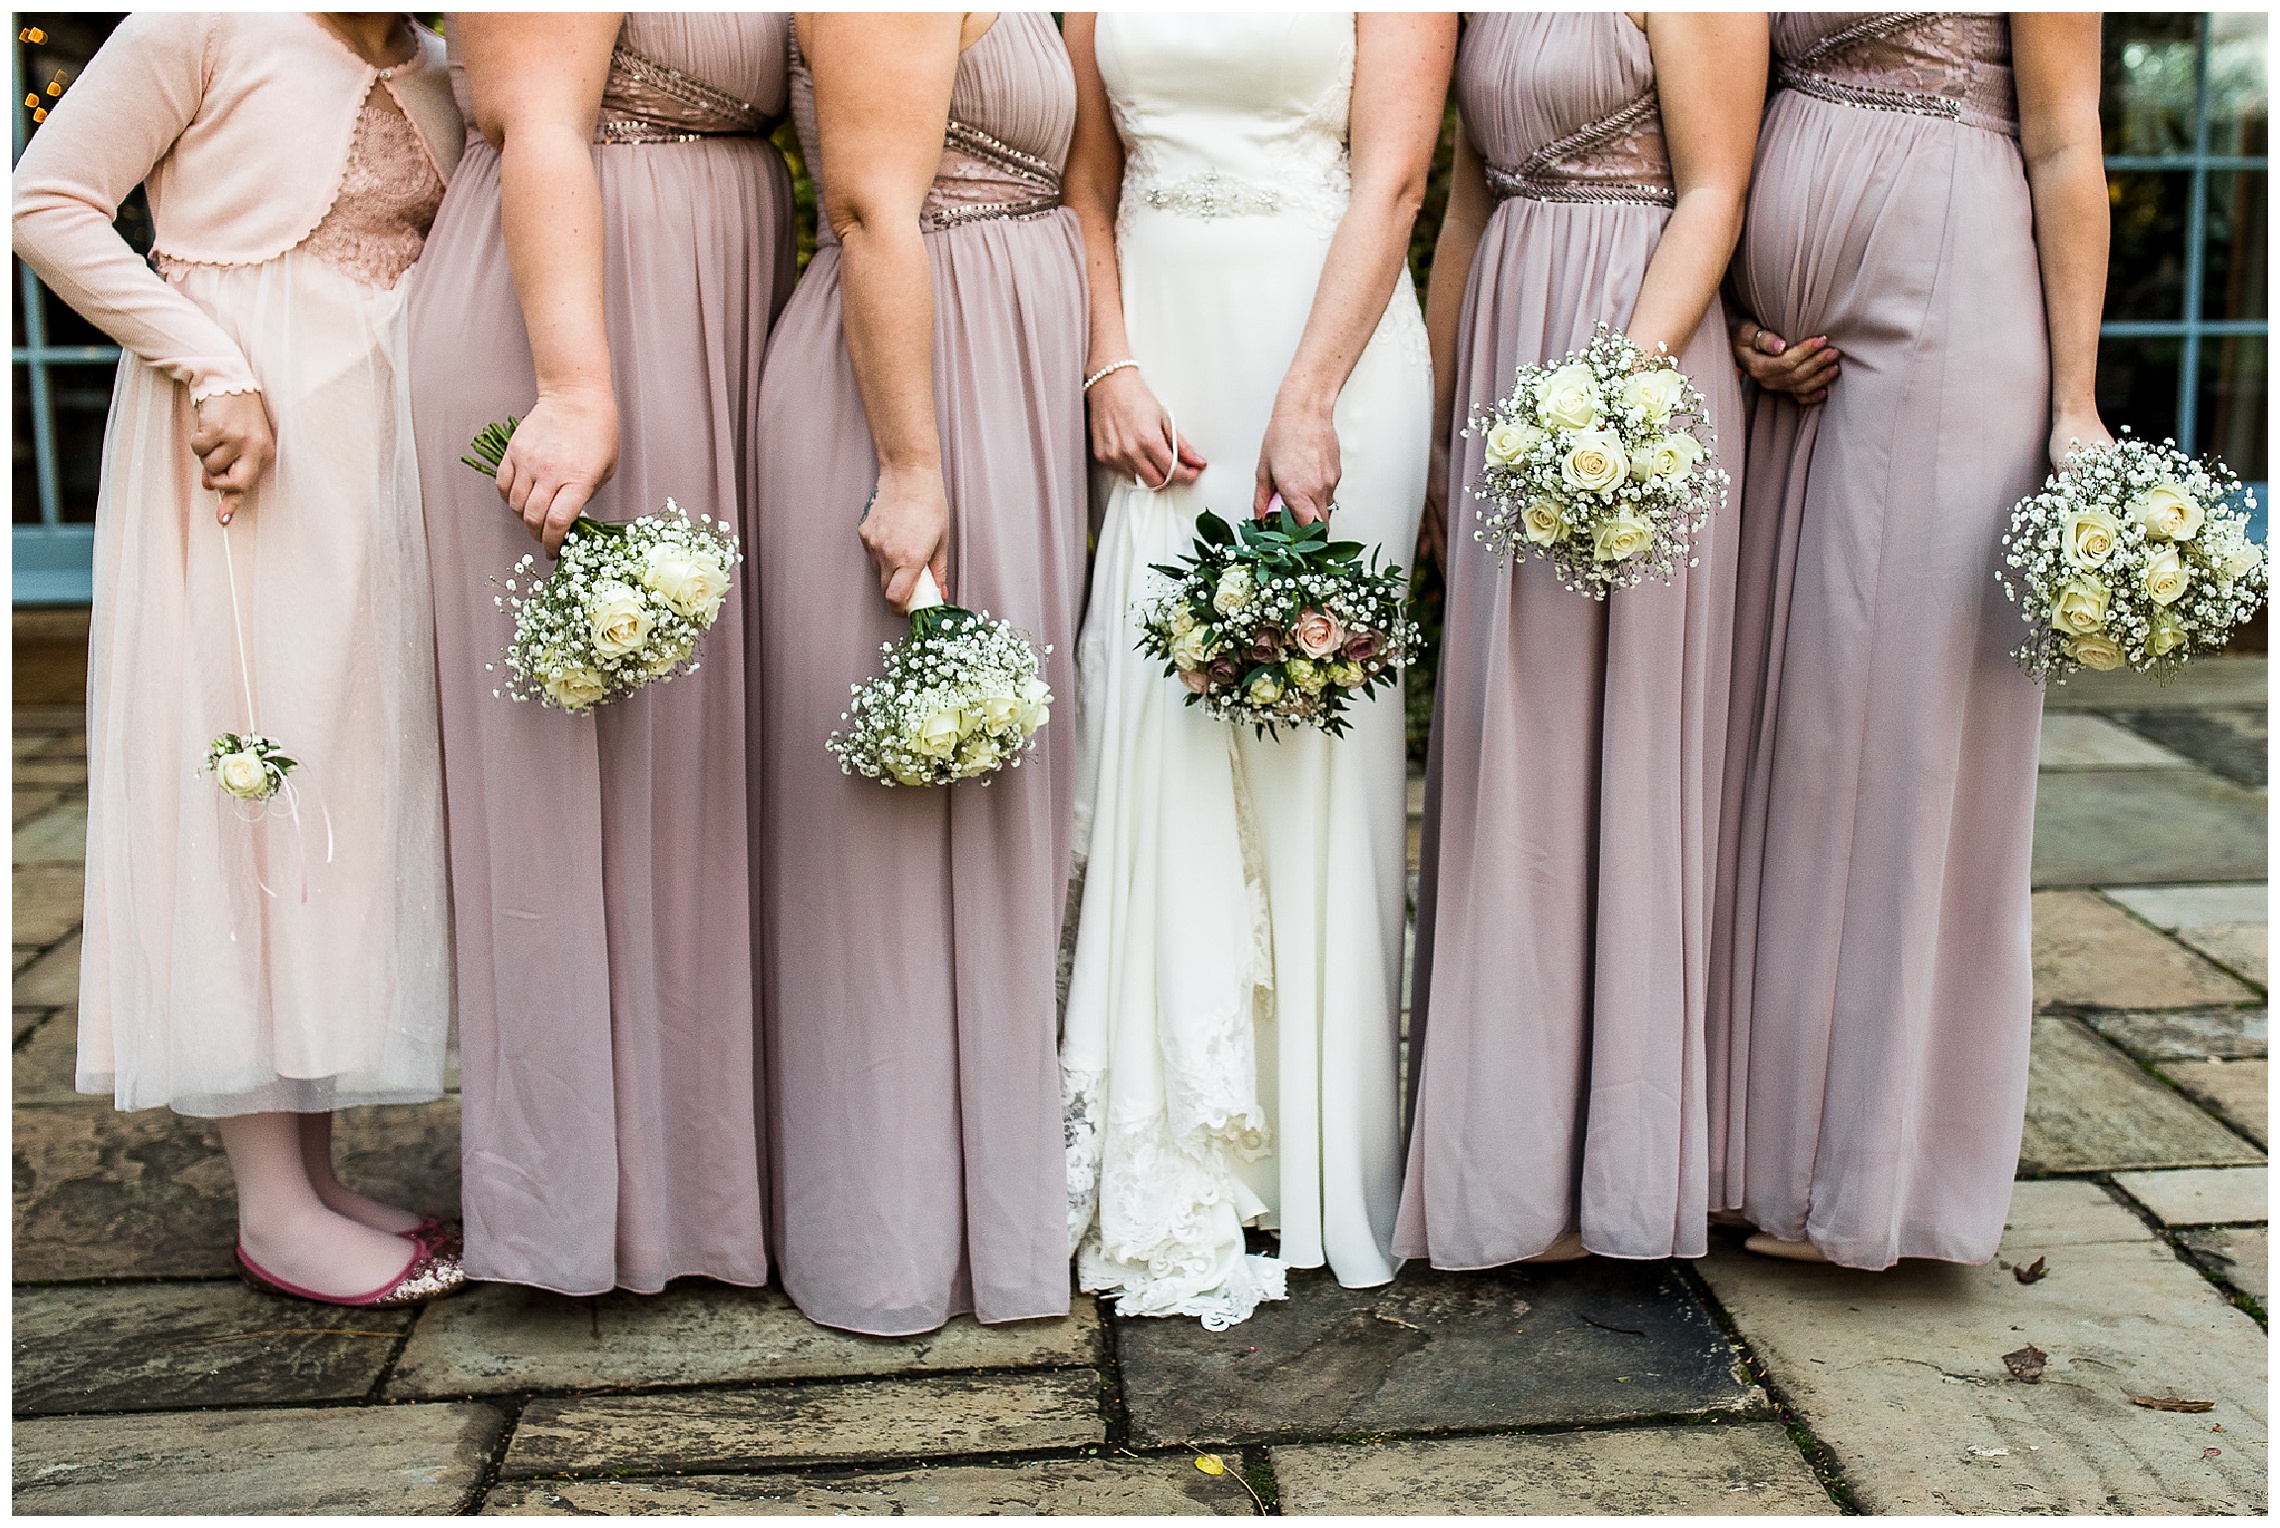 lilac bridesmaids dresses and light wedding bouquets.